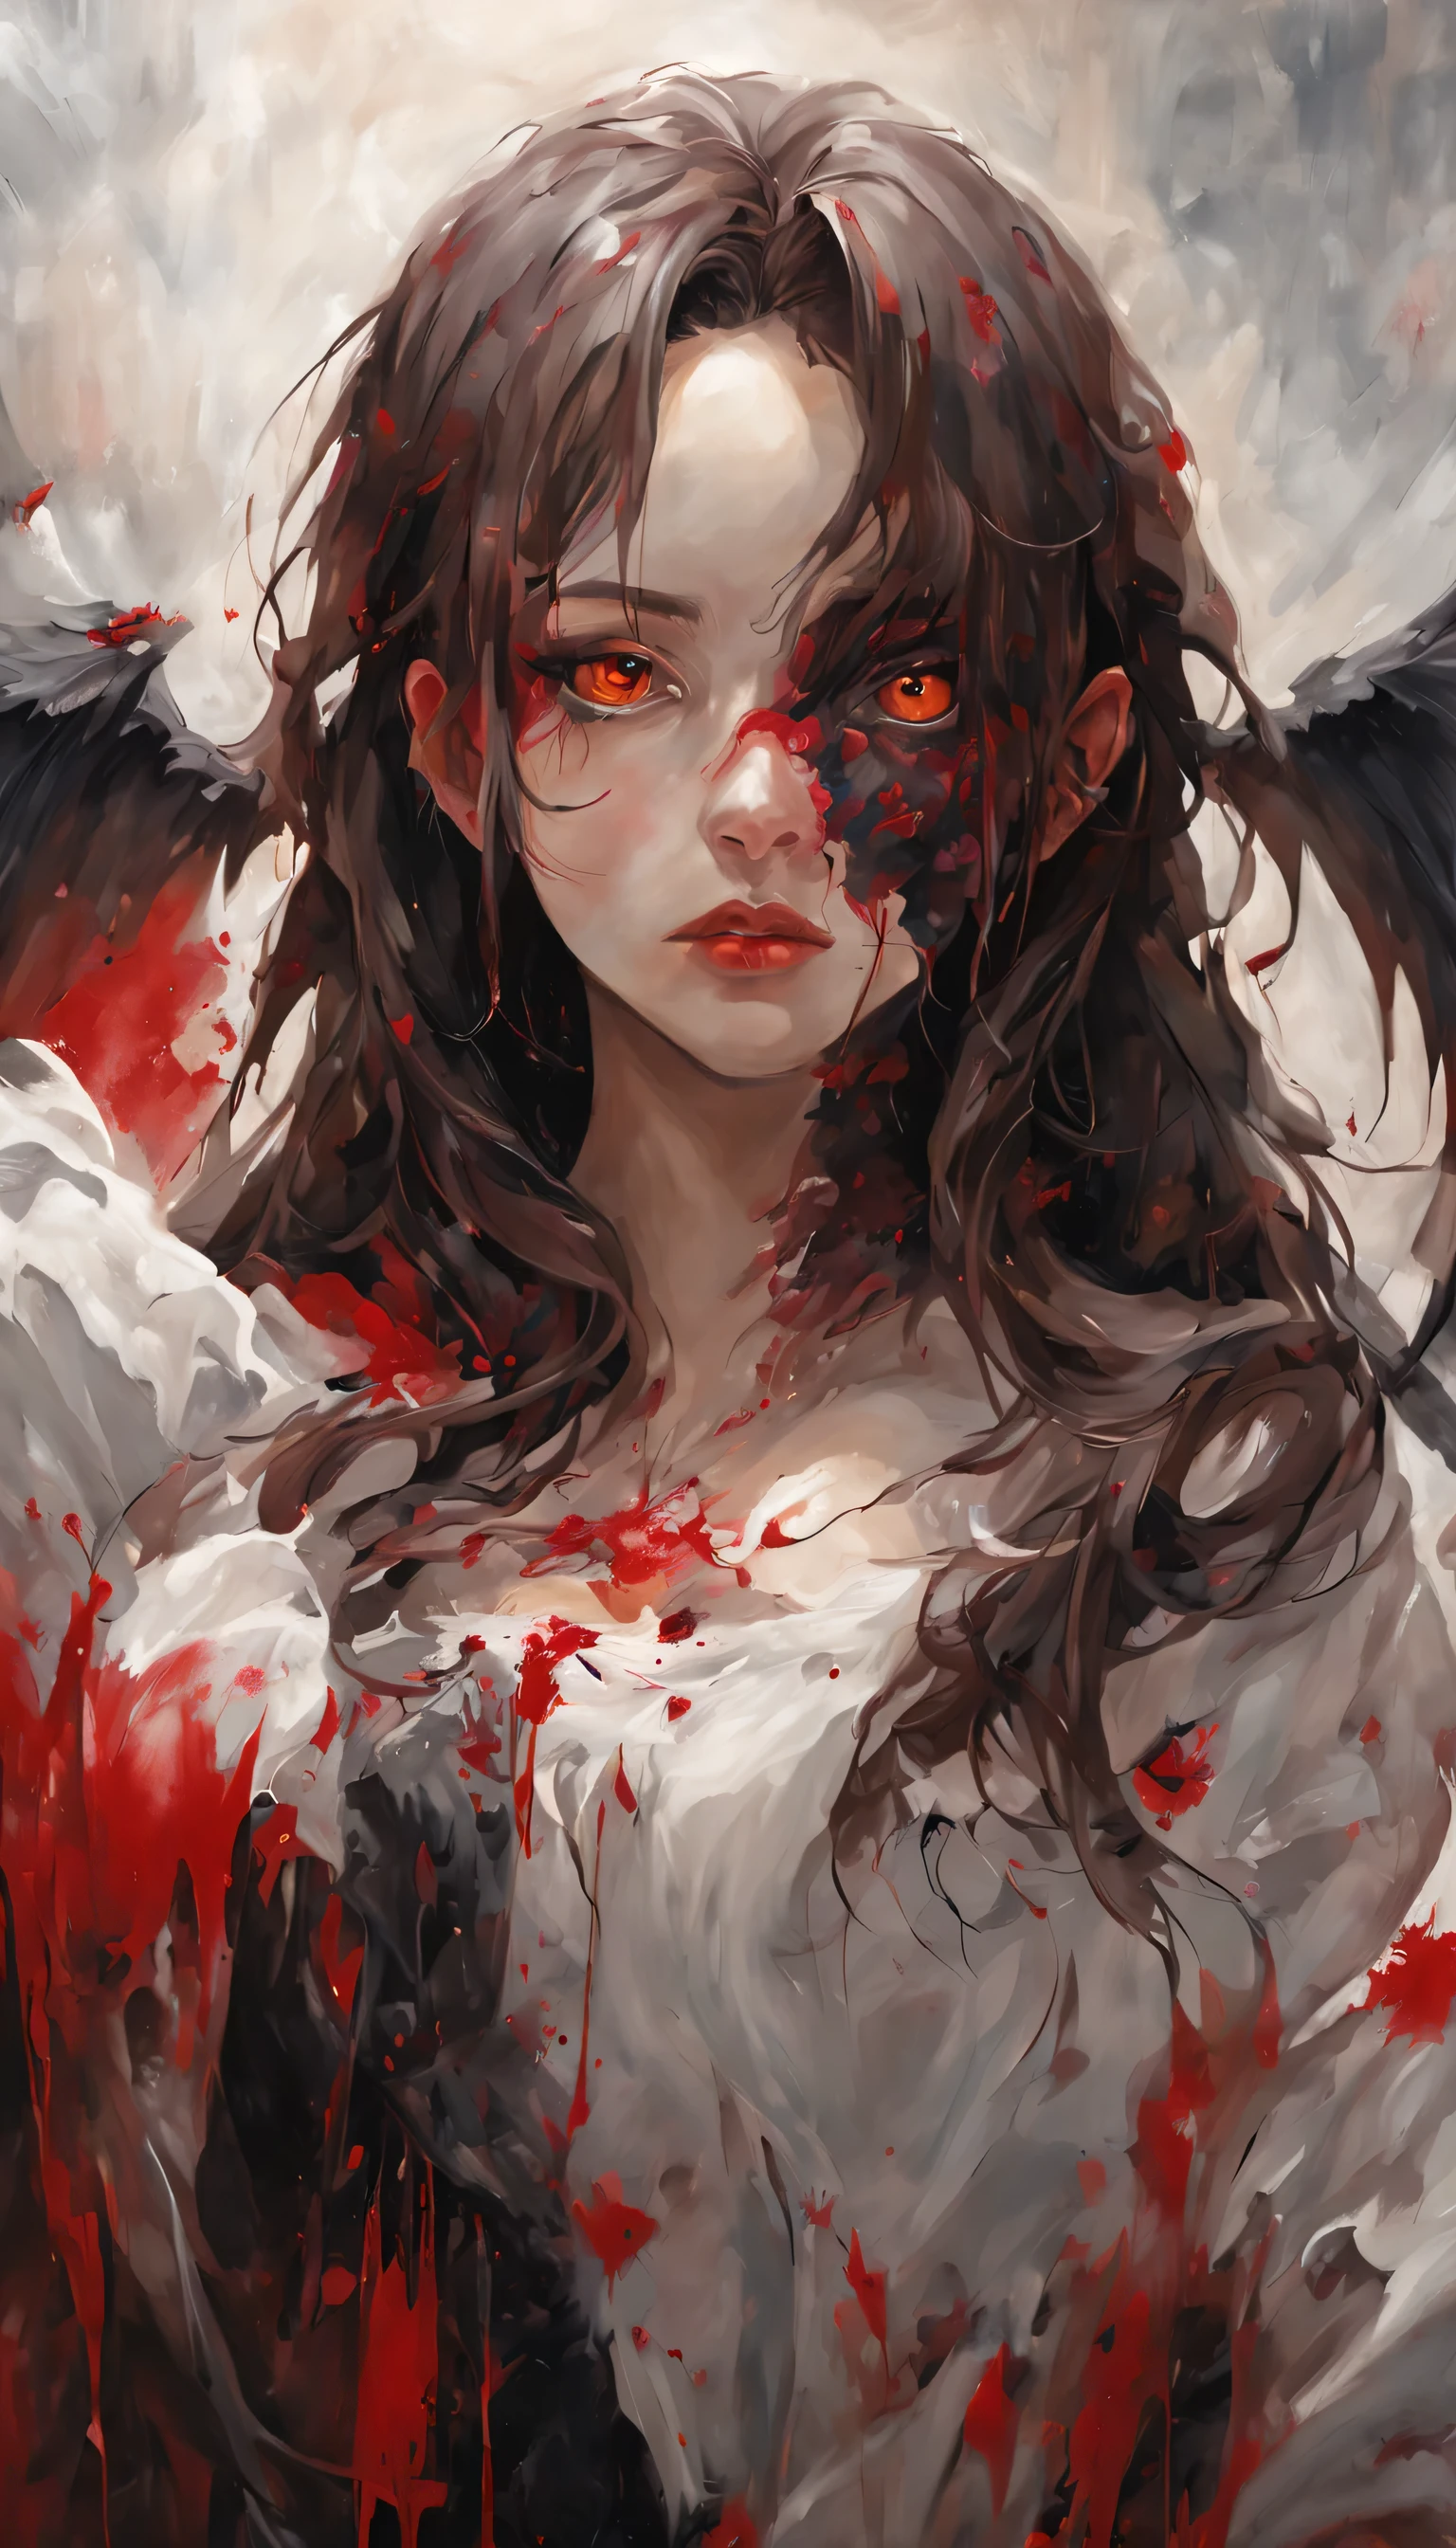 wet-on-wet oil painting depicting a dark angel, a semi-realistic portrait, blood on the angel face,bloody hands, medium shot, red eyes, snake eyes, 